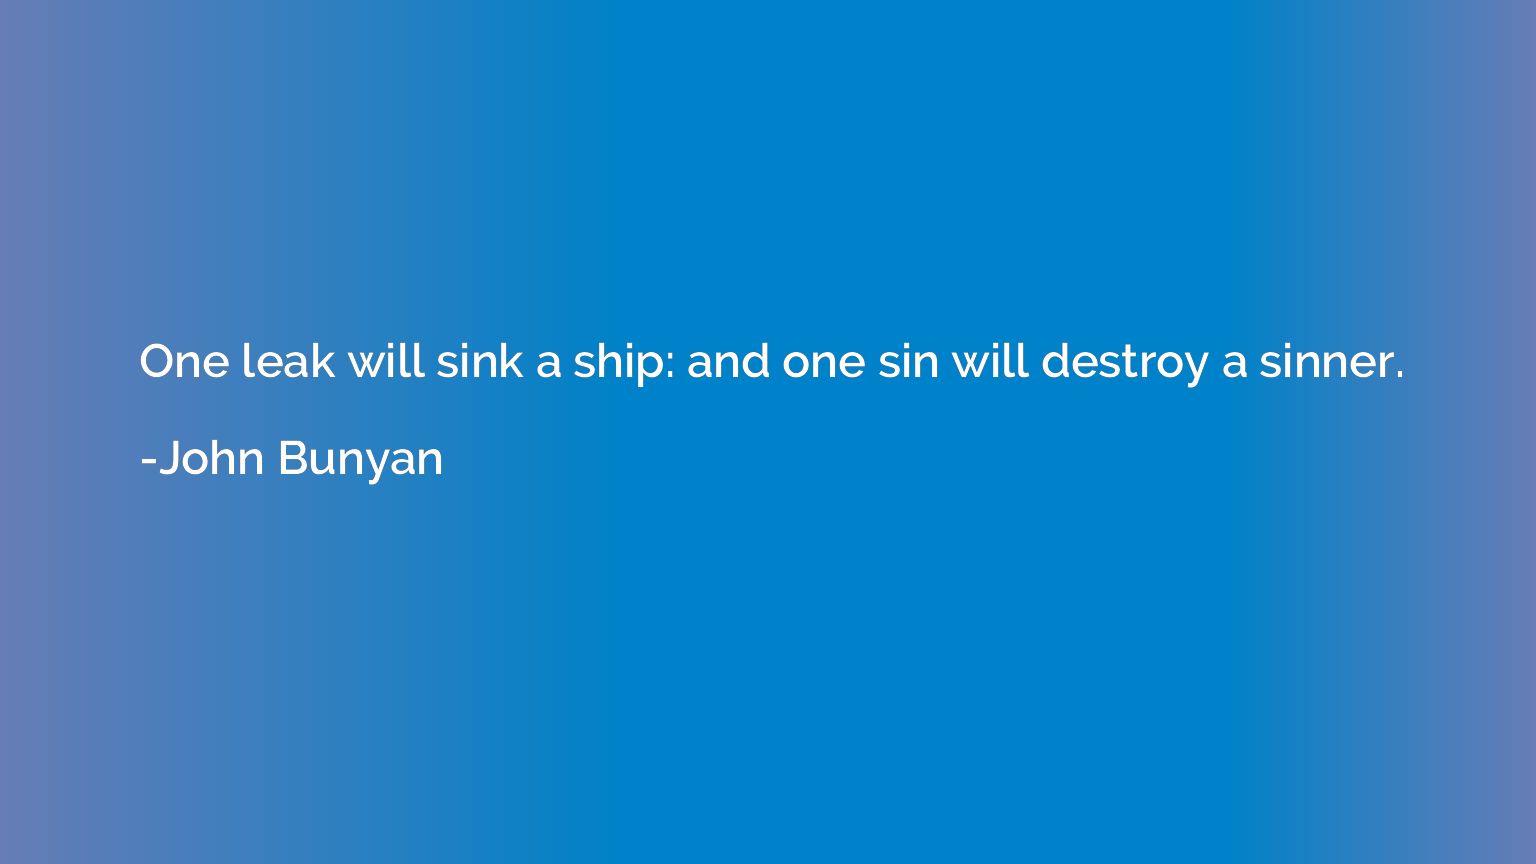 One leak will sink a ship: and one sin will destroy a sinner